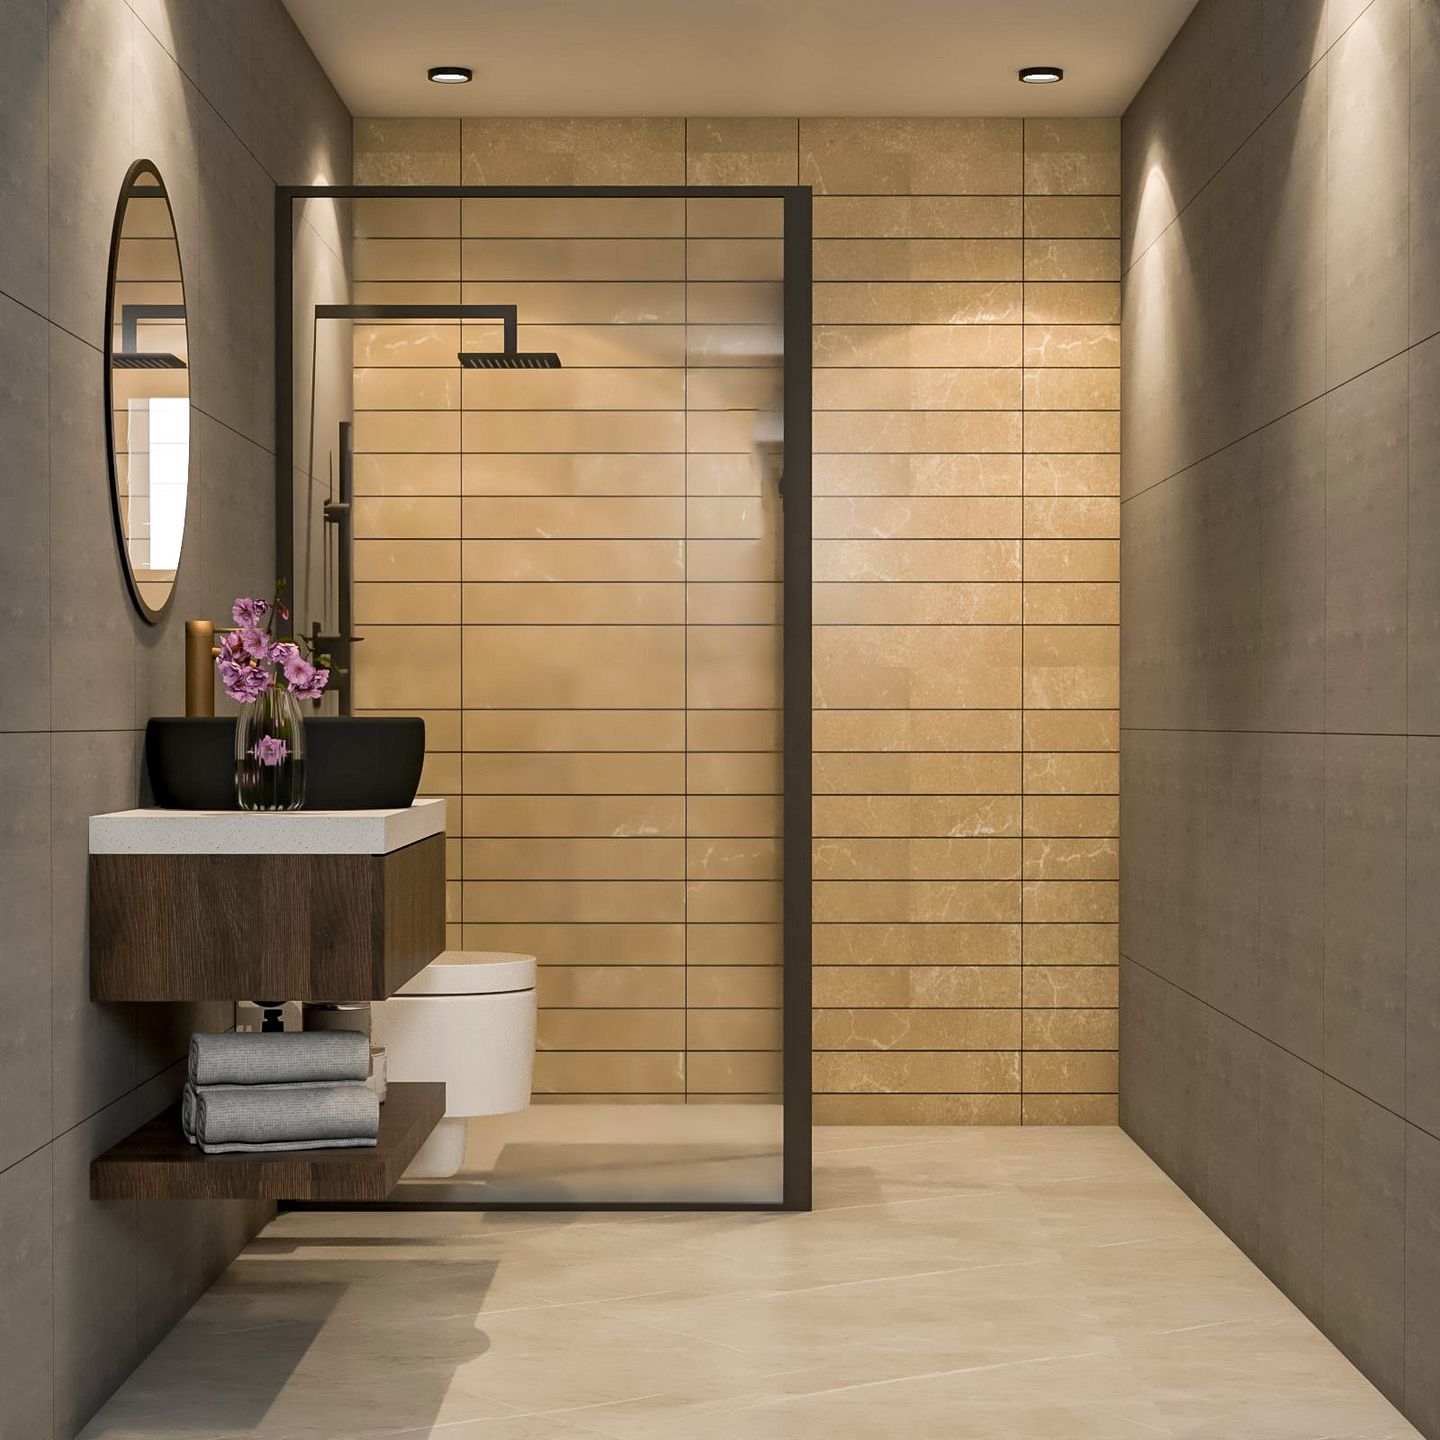 Grey And Brown Bathroom Design With Suede Finish Unit - Livspace